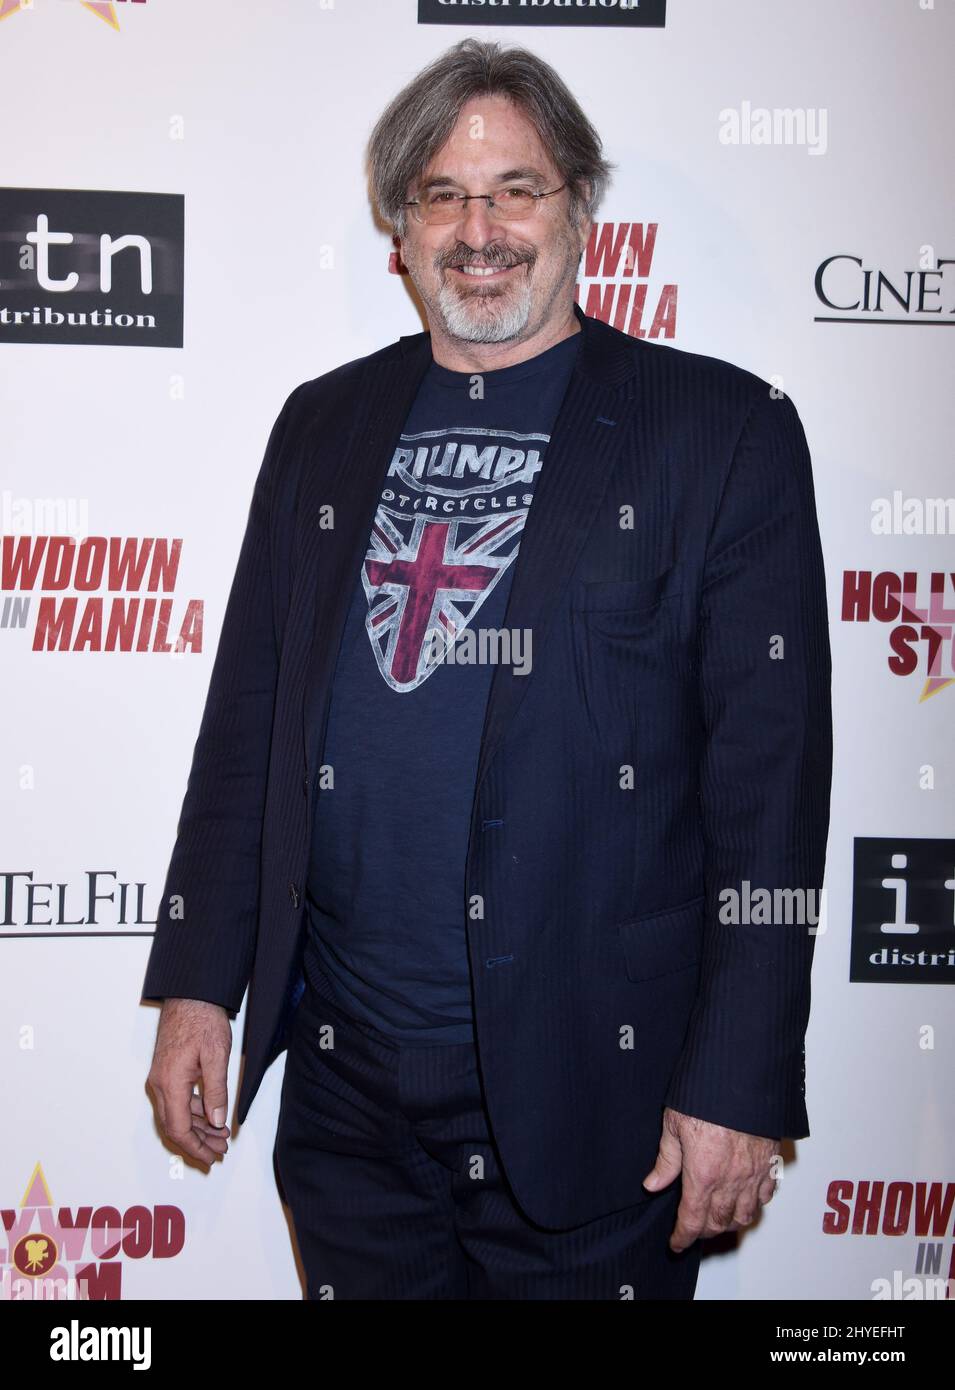 Robert Carradine at ITN Distribution's 'Showdown In Manila' Los Angeles Premiere held at the Laemmle Ahrya Fine Arts Theatre on January 22, 2018 in Beverly Hills, CA. Stock Photo